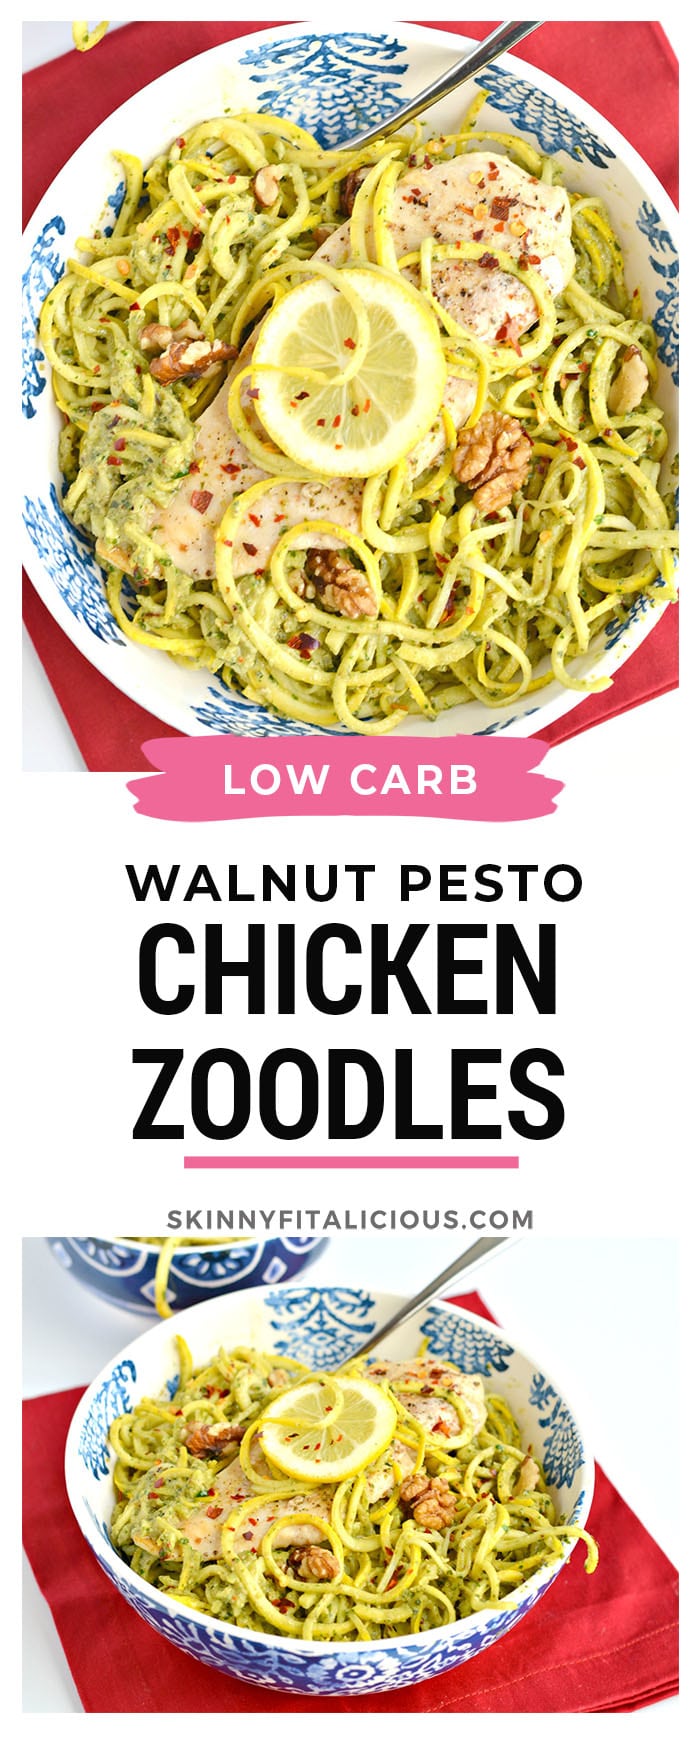 Baked chicken tops spiralized squash with a homemade walnut pesto in this Walnut Pesto Chicken Summer Squash. A simple 30 minute, HEALTHY meal that's Whole 30 compliant, Paleo, Gluten Free and low calorie friendly!